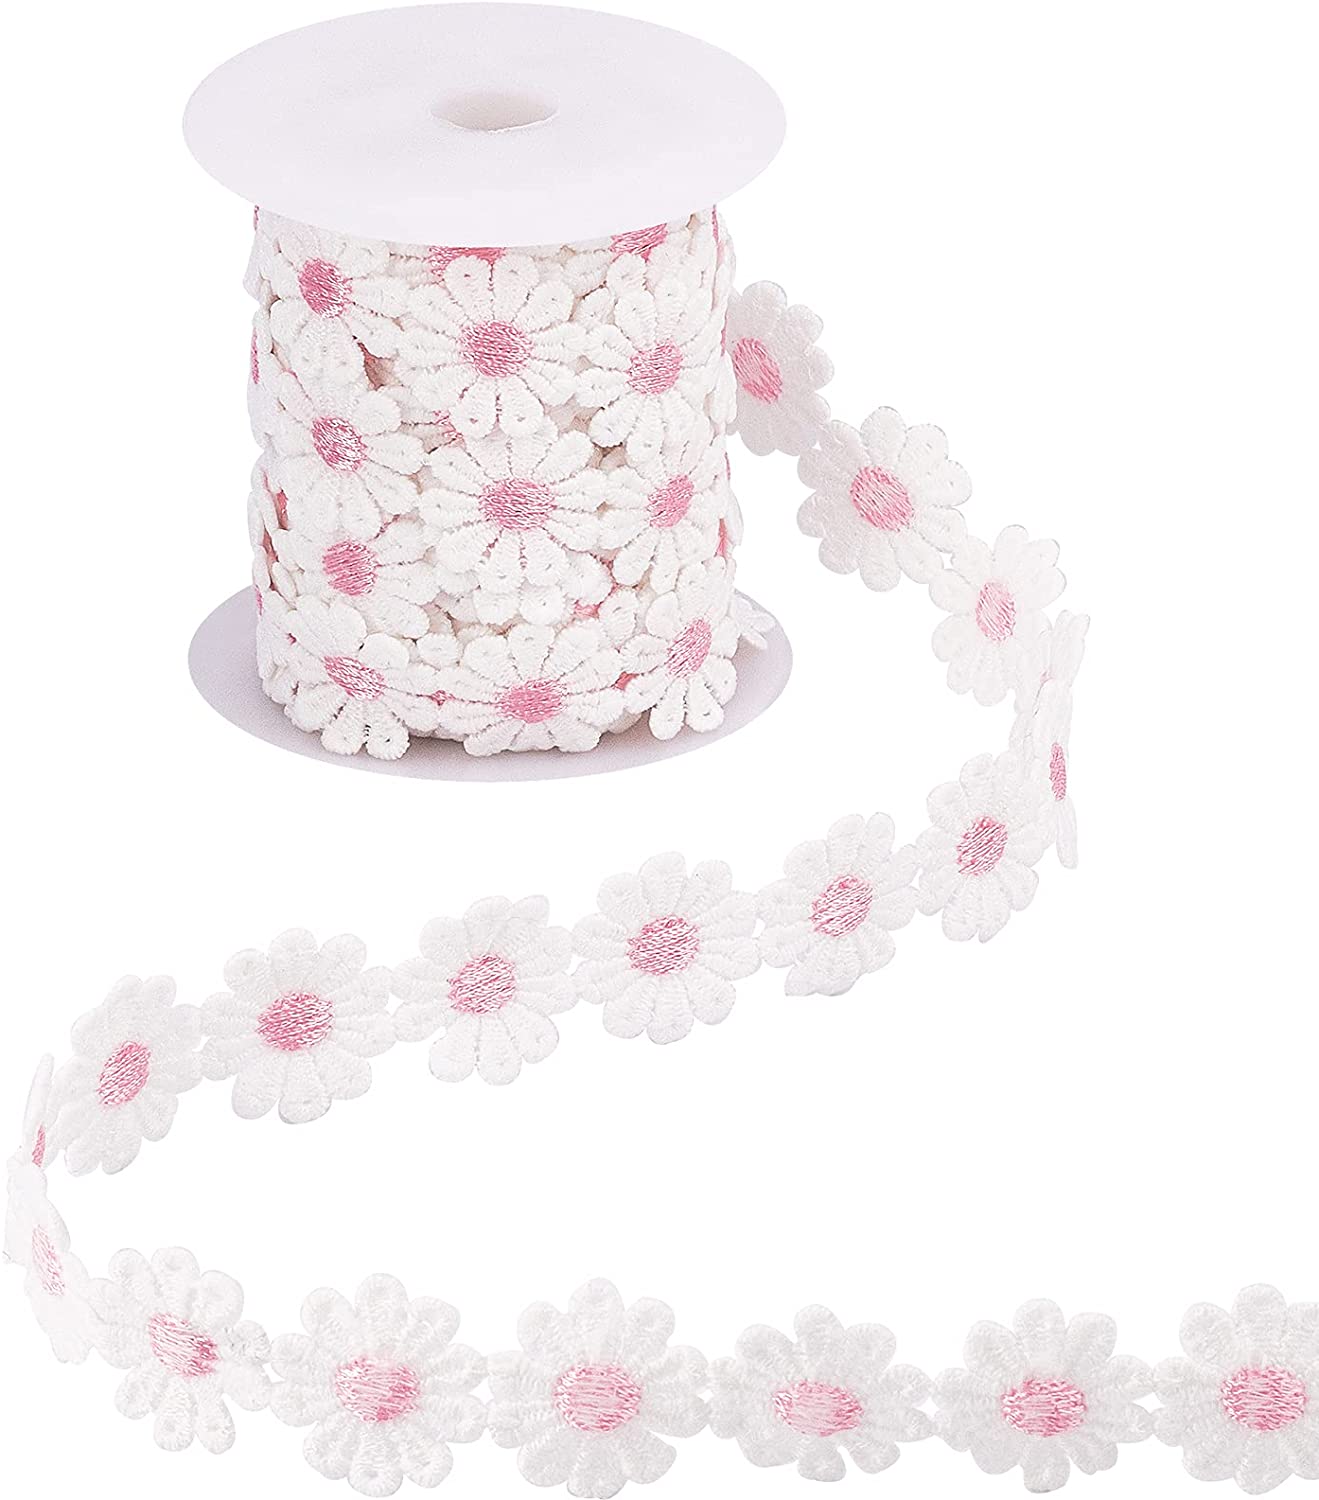 1 Roll 7 Yards Lace Daisy Flower Edging Trim Ribbon, 25mm Wide Polyester Flower Ribbon Appliques with Plastic Spool Sewing Embroidery Crafts for Wedding Dress Clothes Decoration, Pink